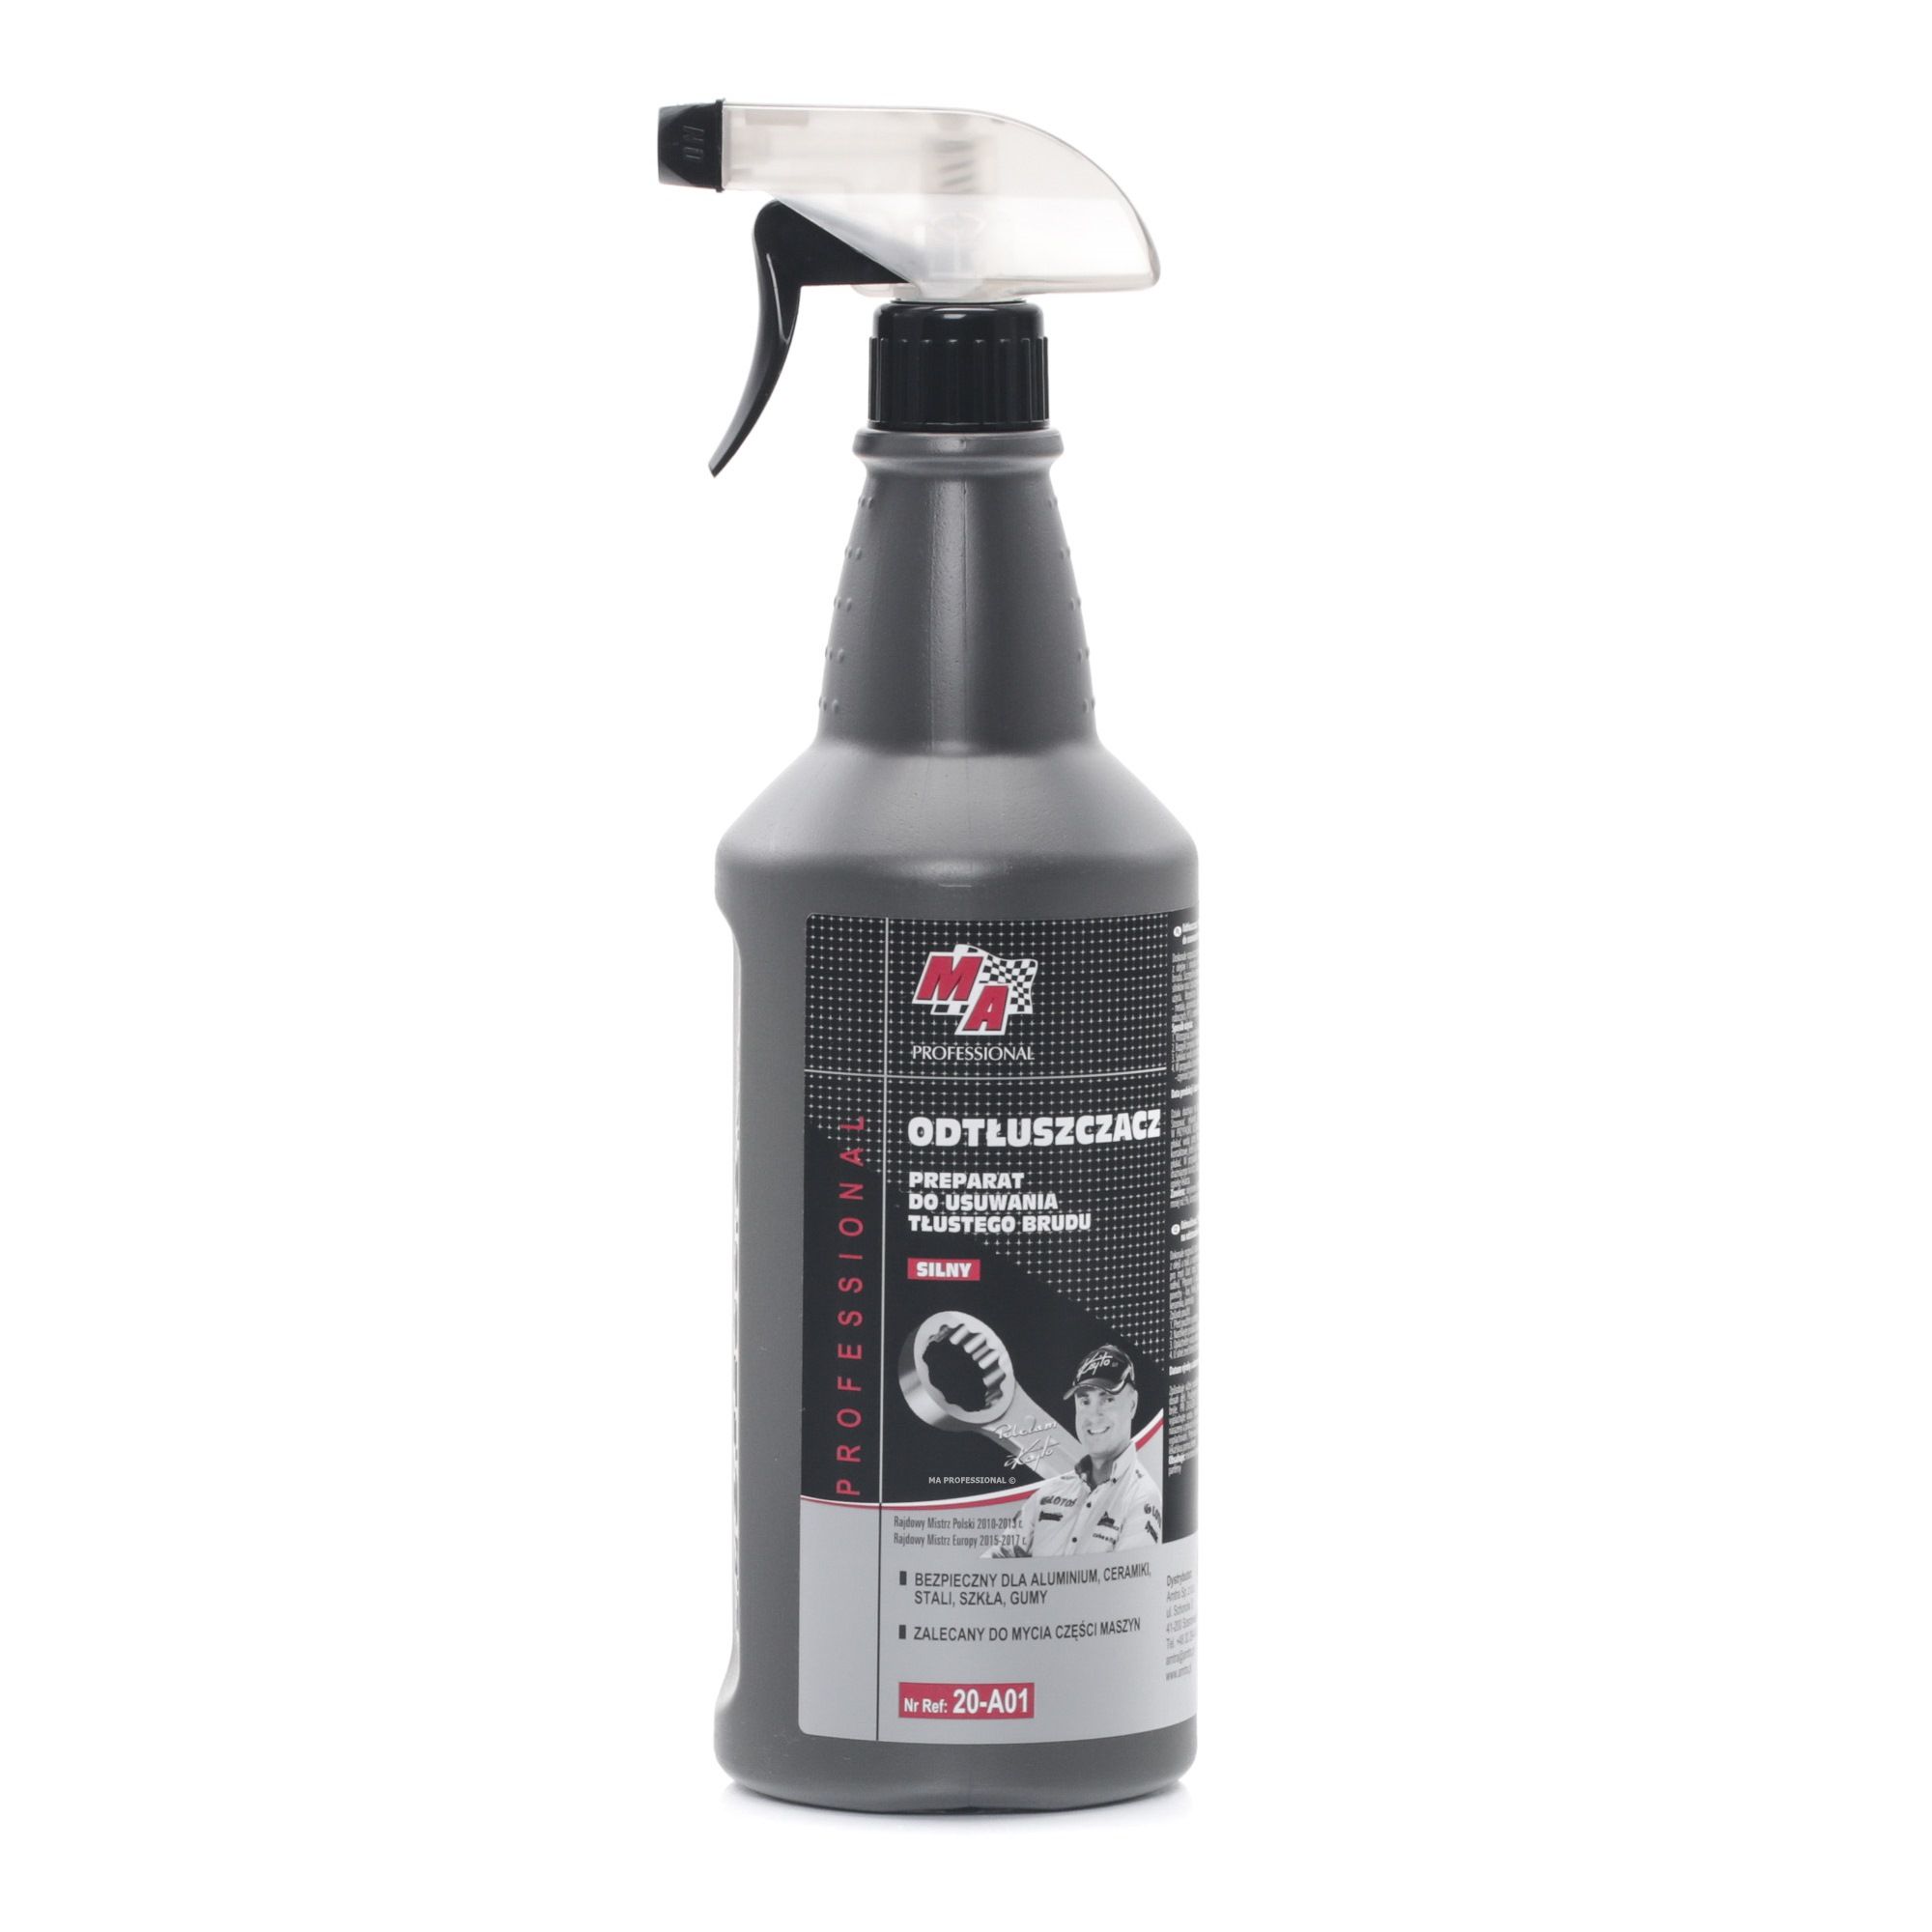 Image of MA PROFESSIONAL Detergente / Diluente 20-A01